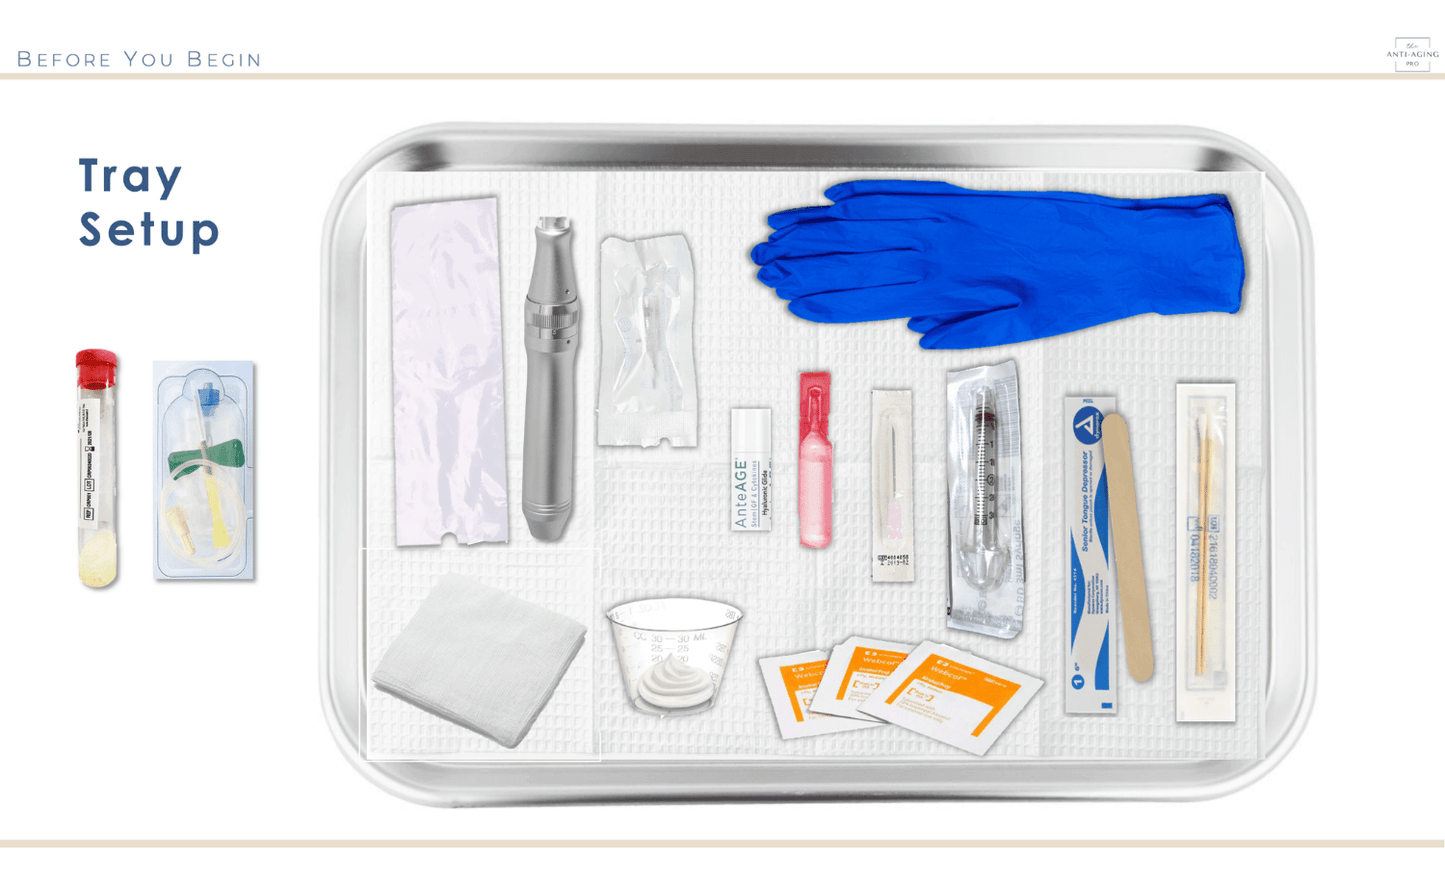 Microneedling treatment tray setup with supplies